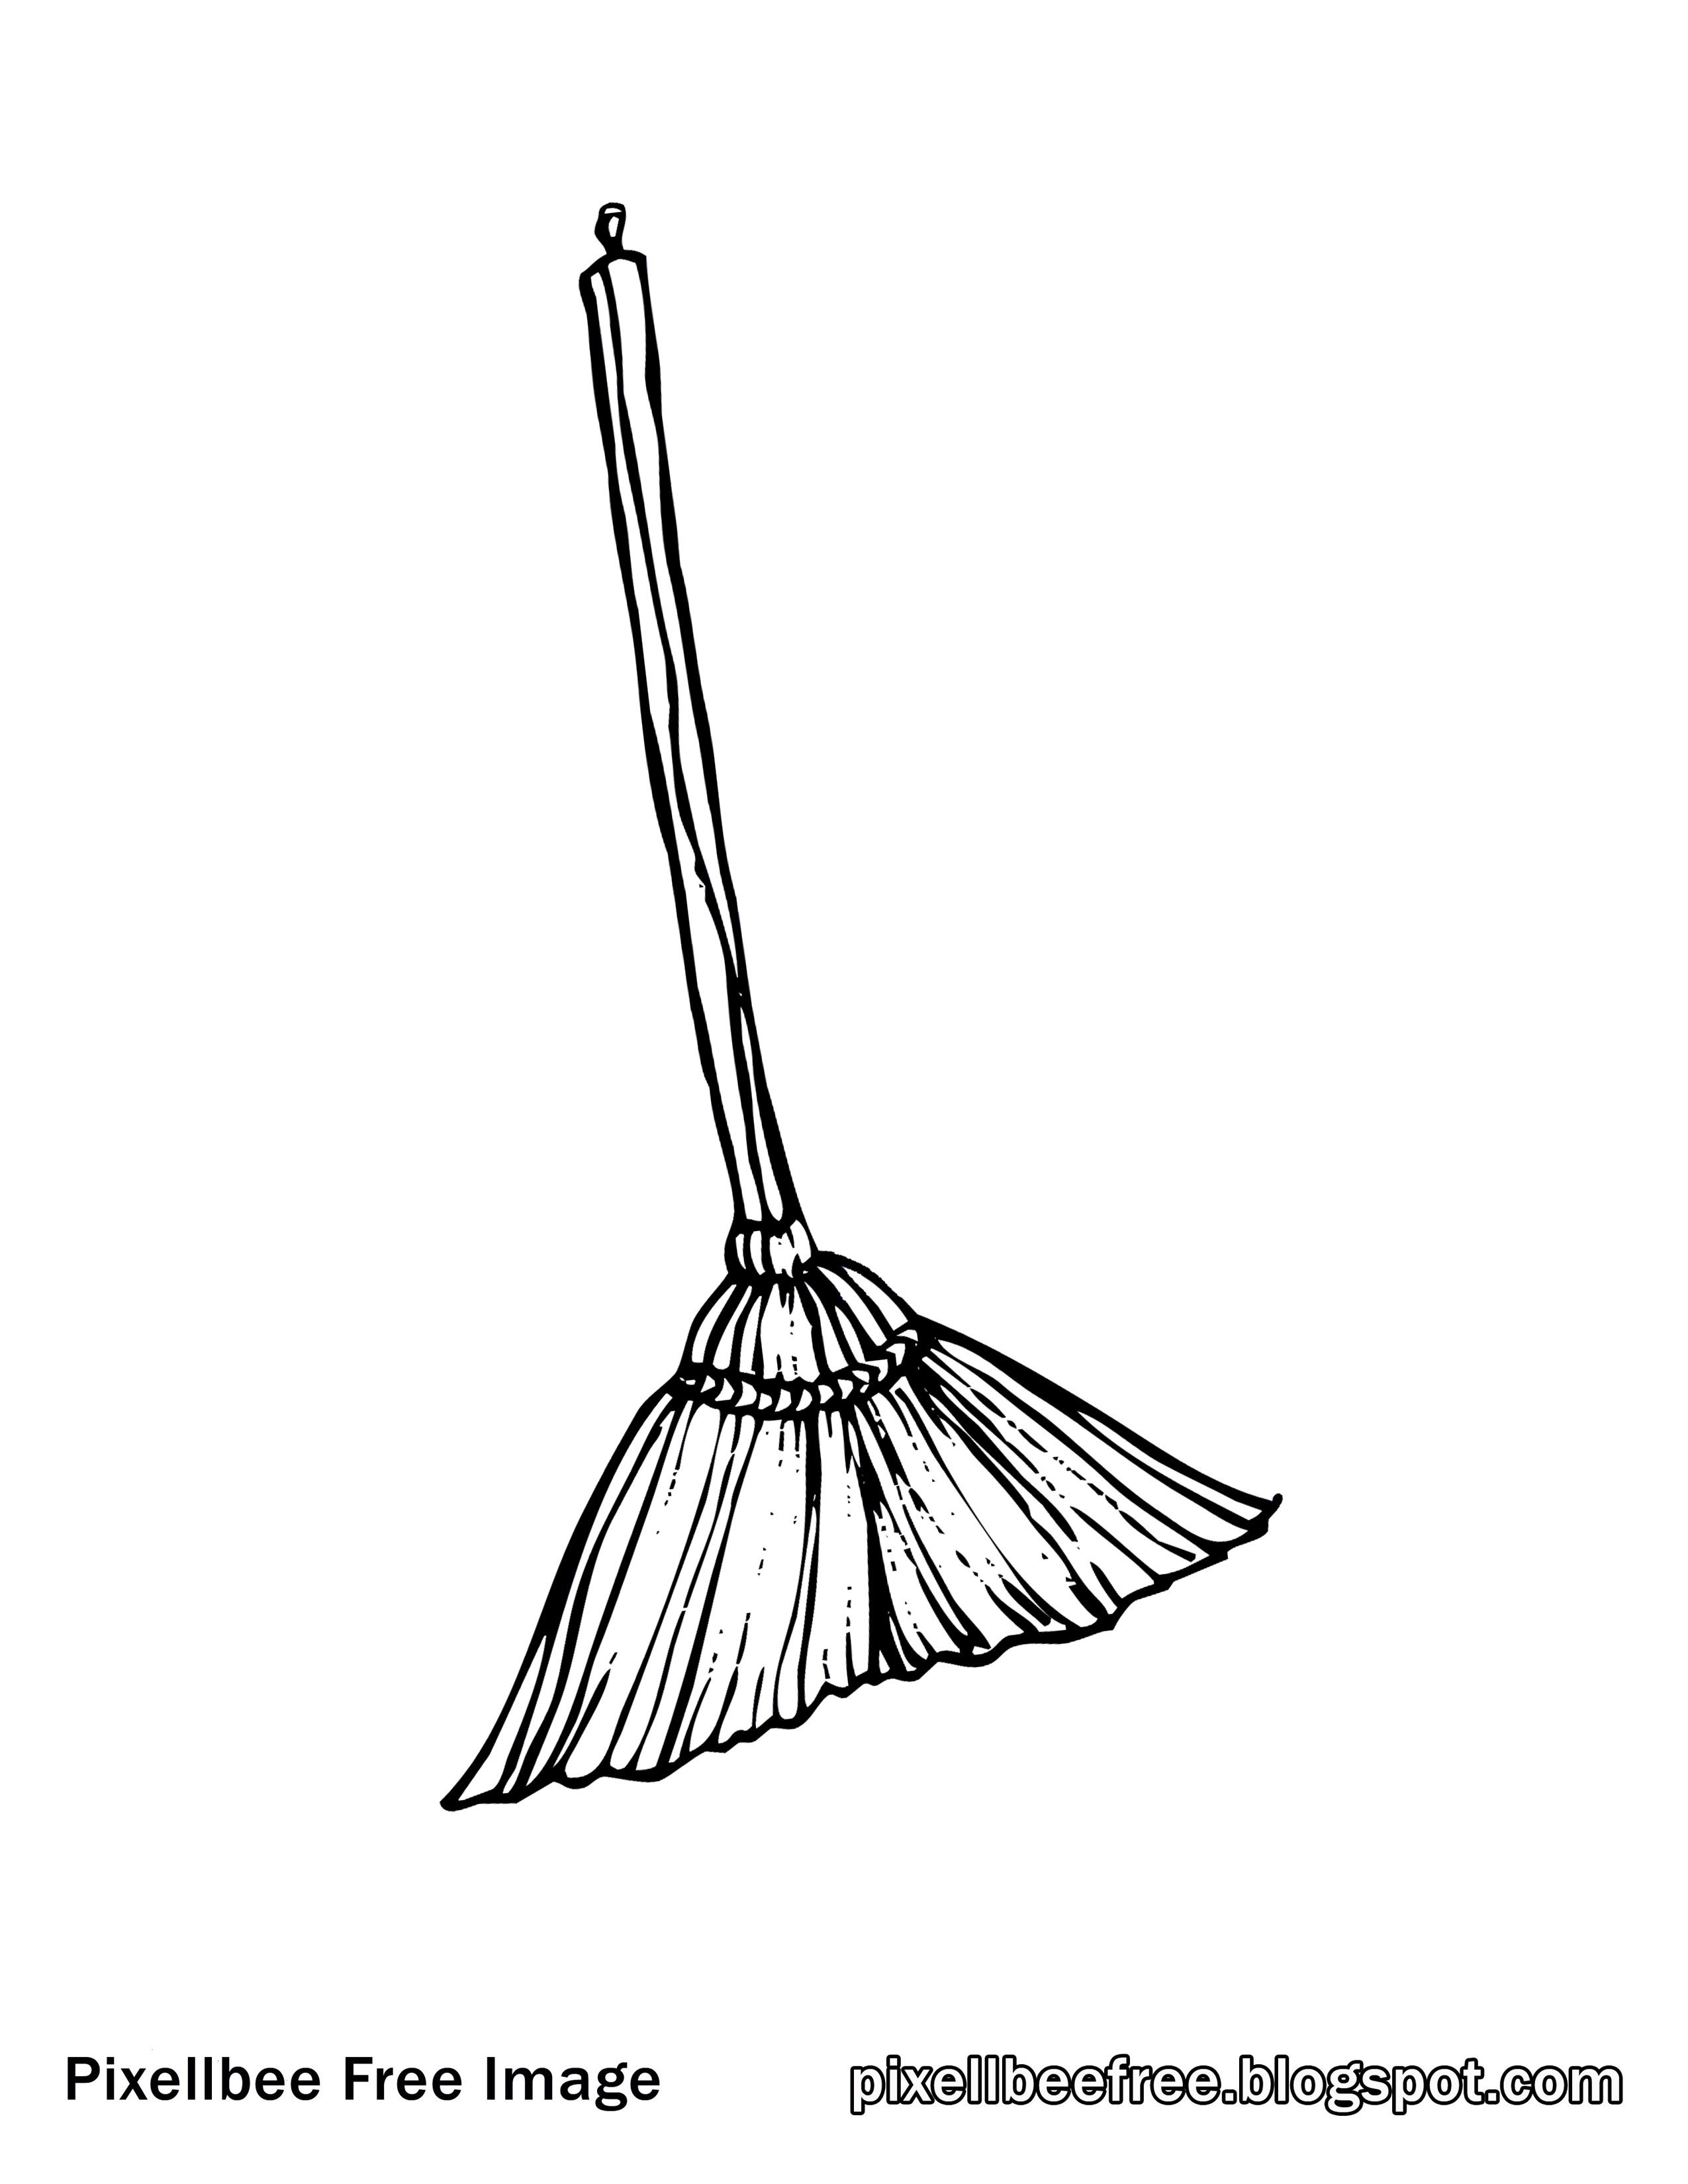 Broom clipart draw, Broom draw Transparent FREE for download on ...